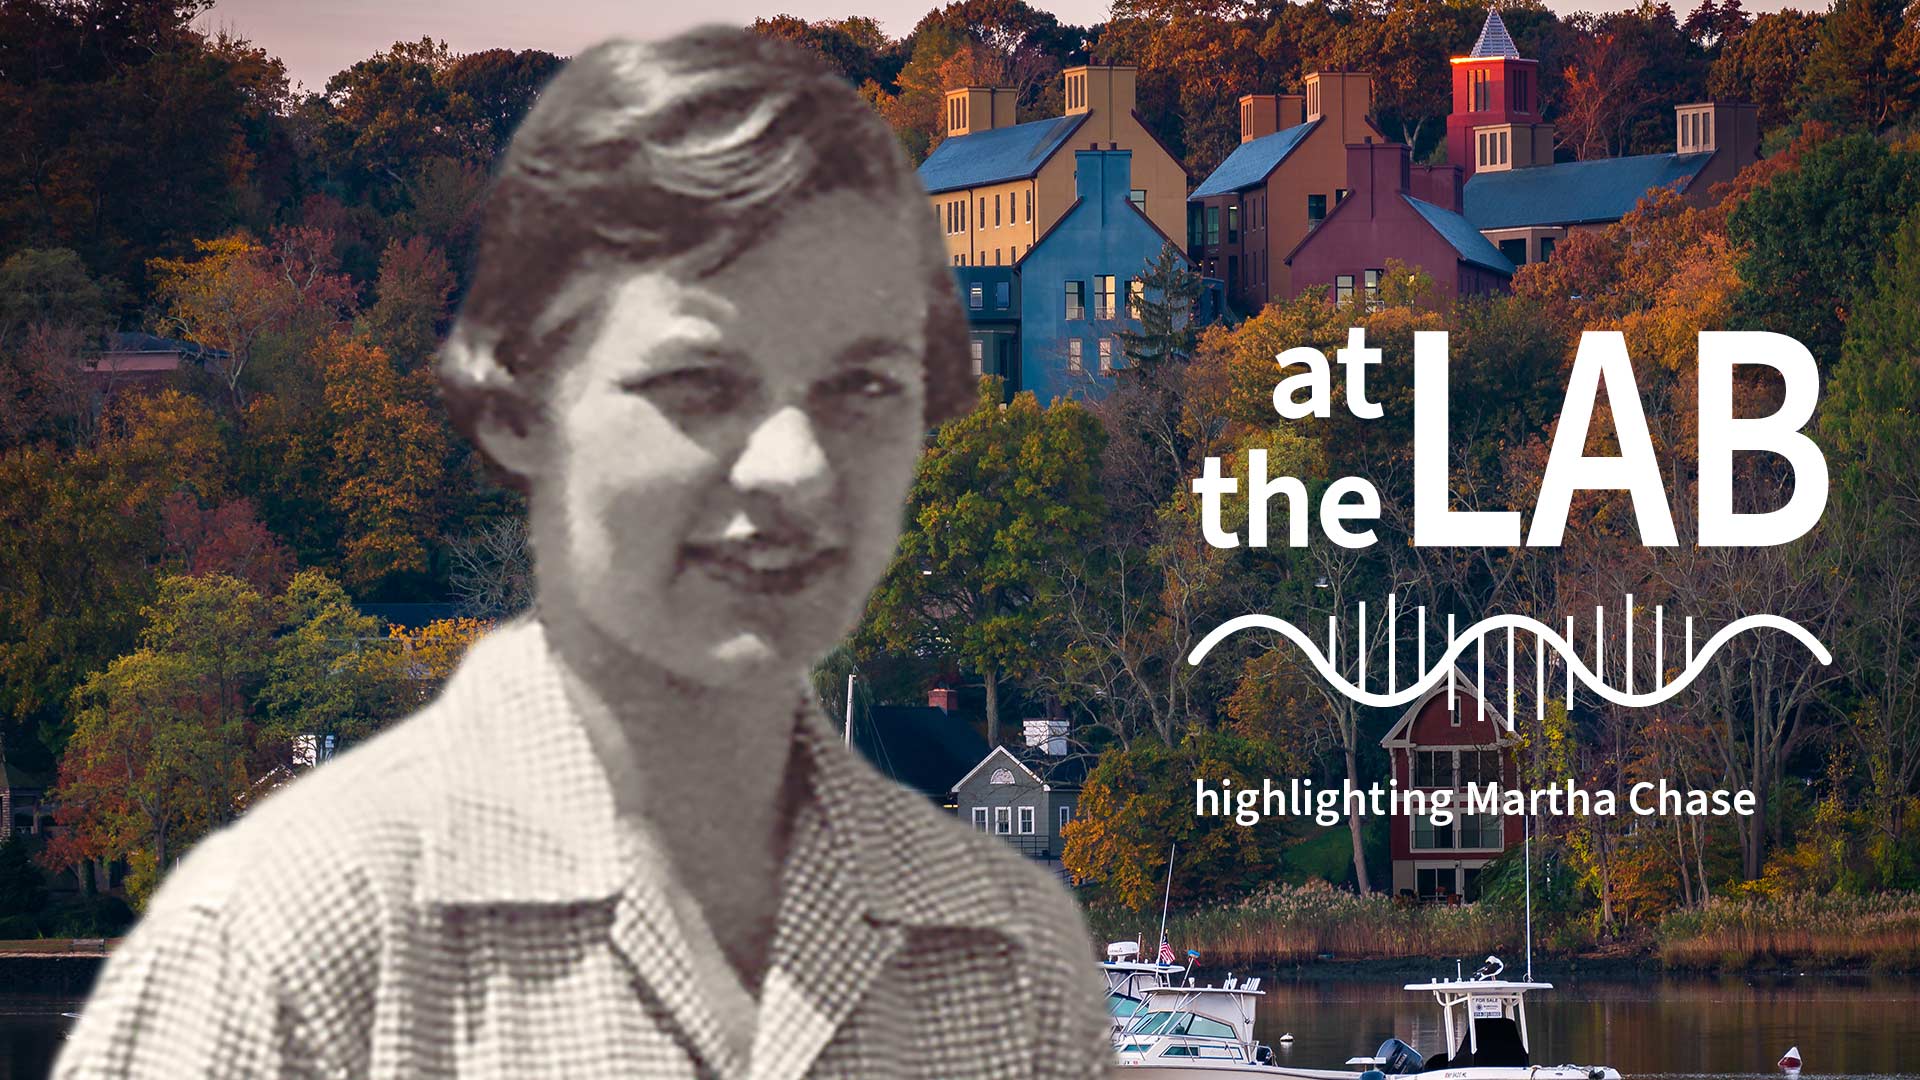 image of Cold Spring Harbor campus from across the harbor with At the Lab podcast logo and portrait of Martha Chase